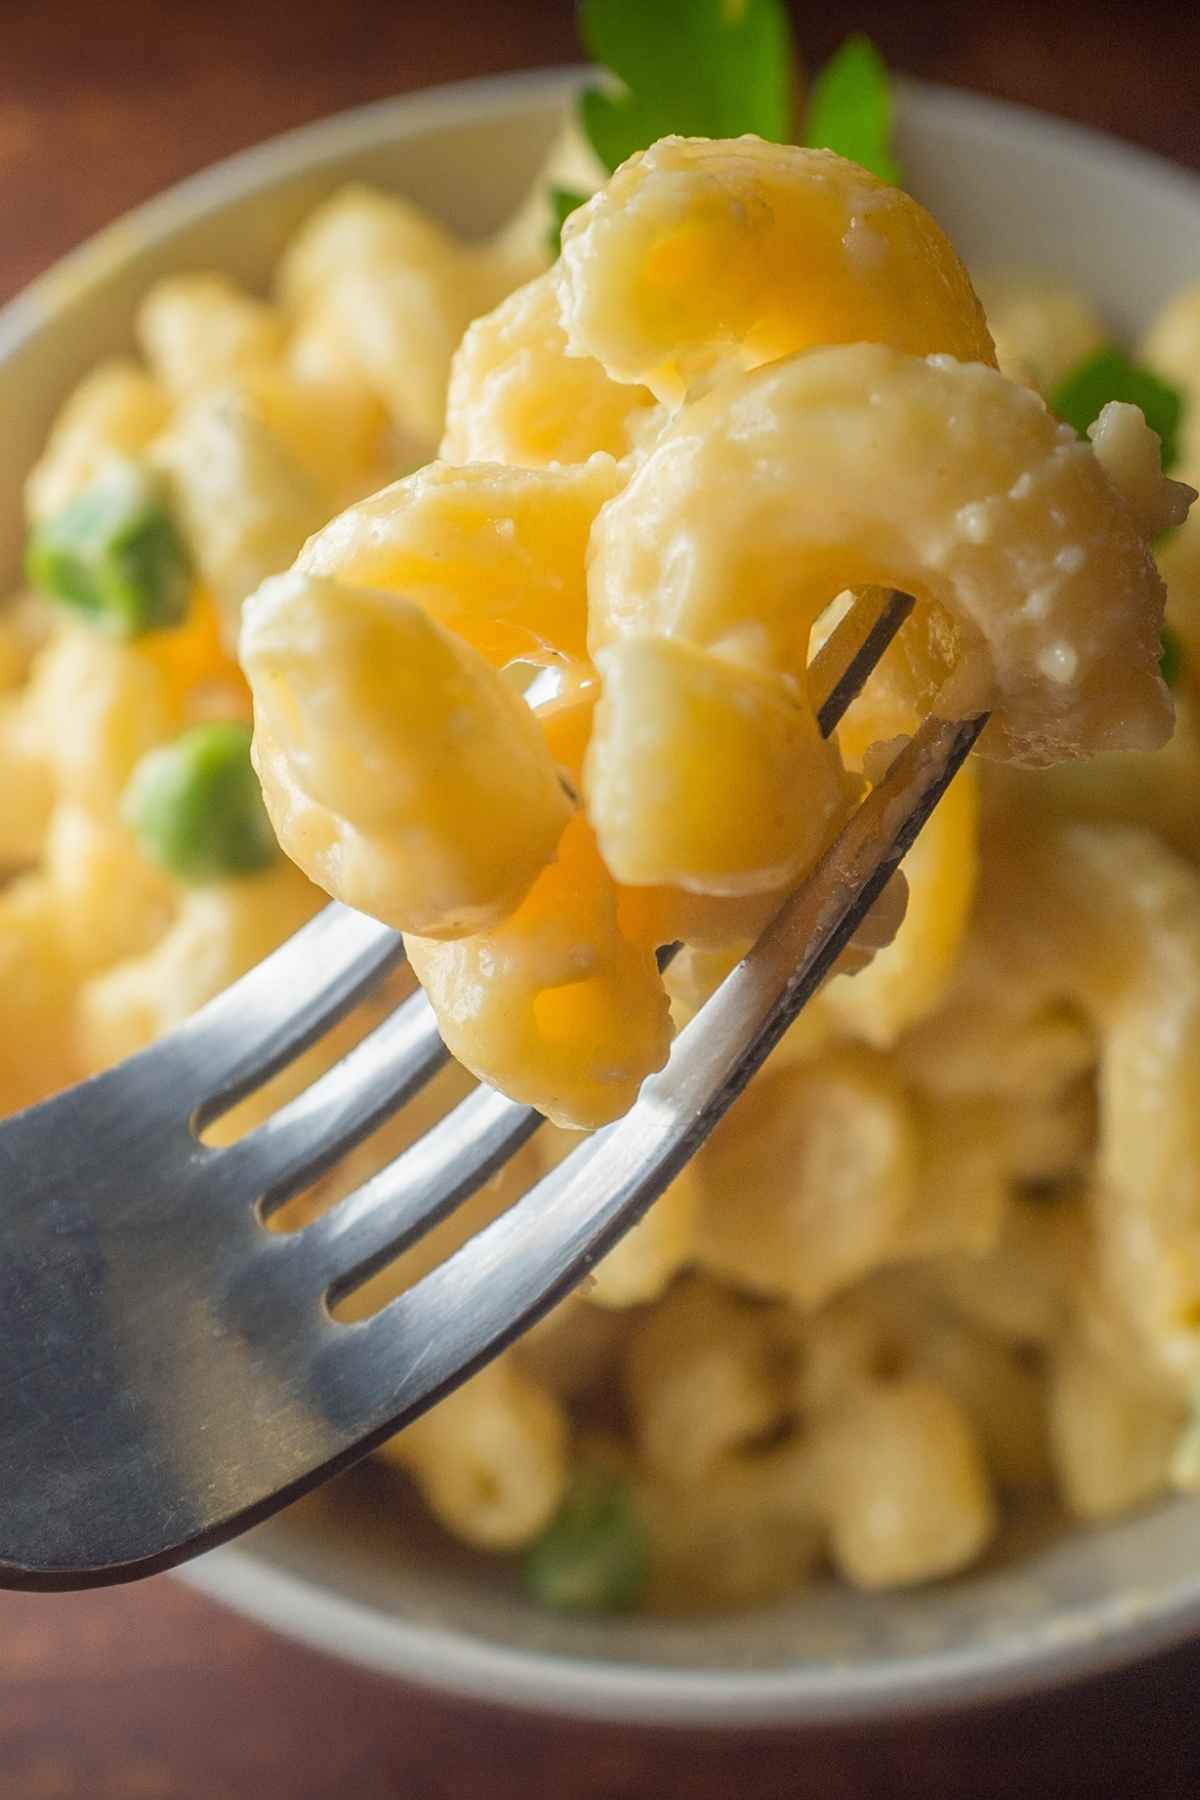 If you’re looking for a meal to treat yourself or someone else, this dish should do the trick. Truffle Mac and Cheese is like nothing you’ve ever tasted! It’s perfect for special occasions and celebrations, or a cozy night at home.